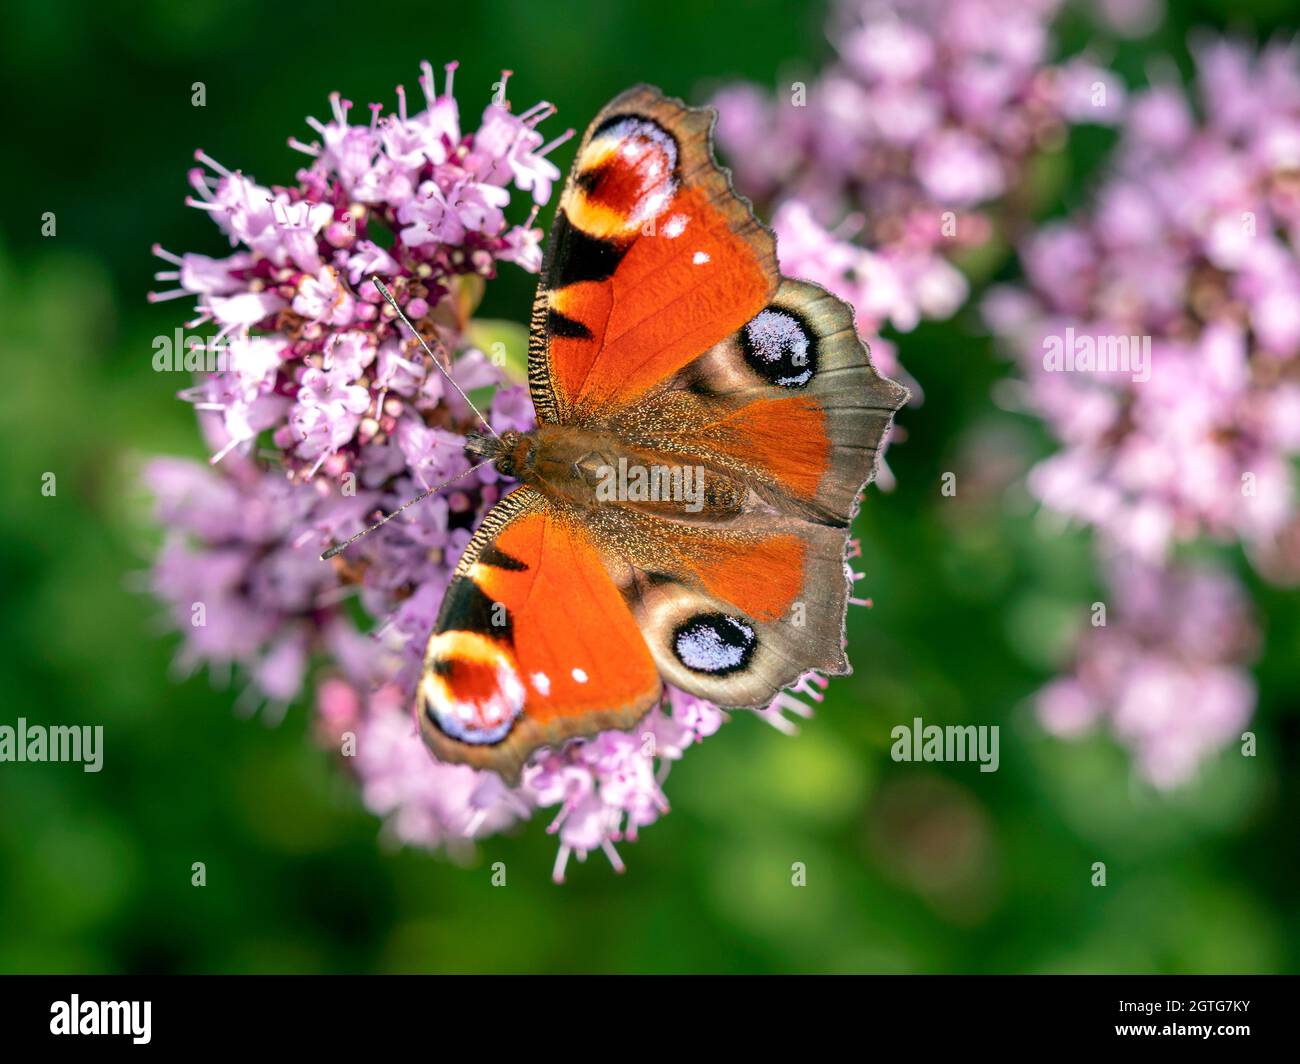 Peacock butterfly feeding on the flowers of an oregano plant Stock Photo